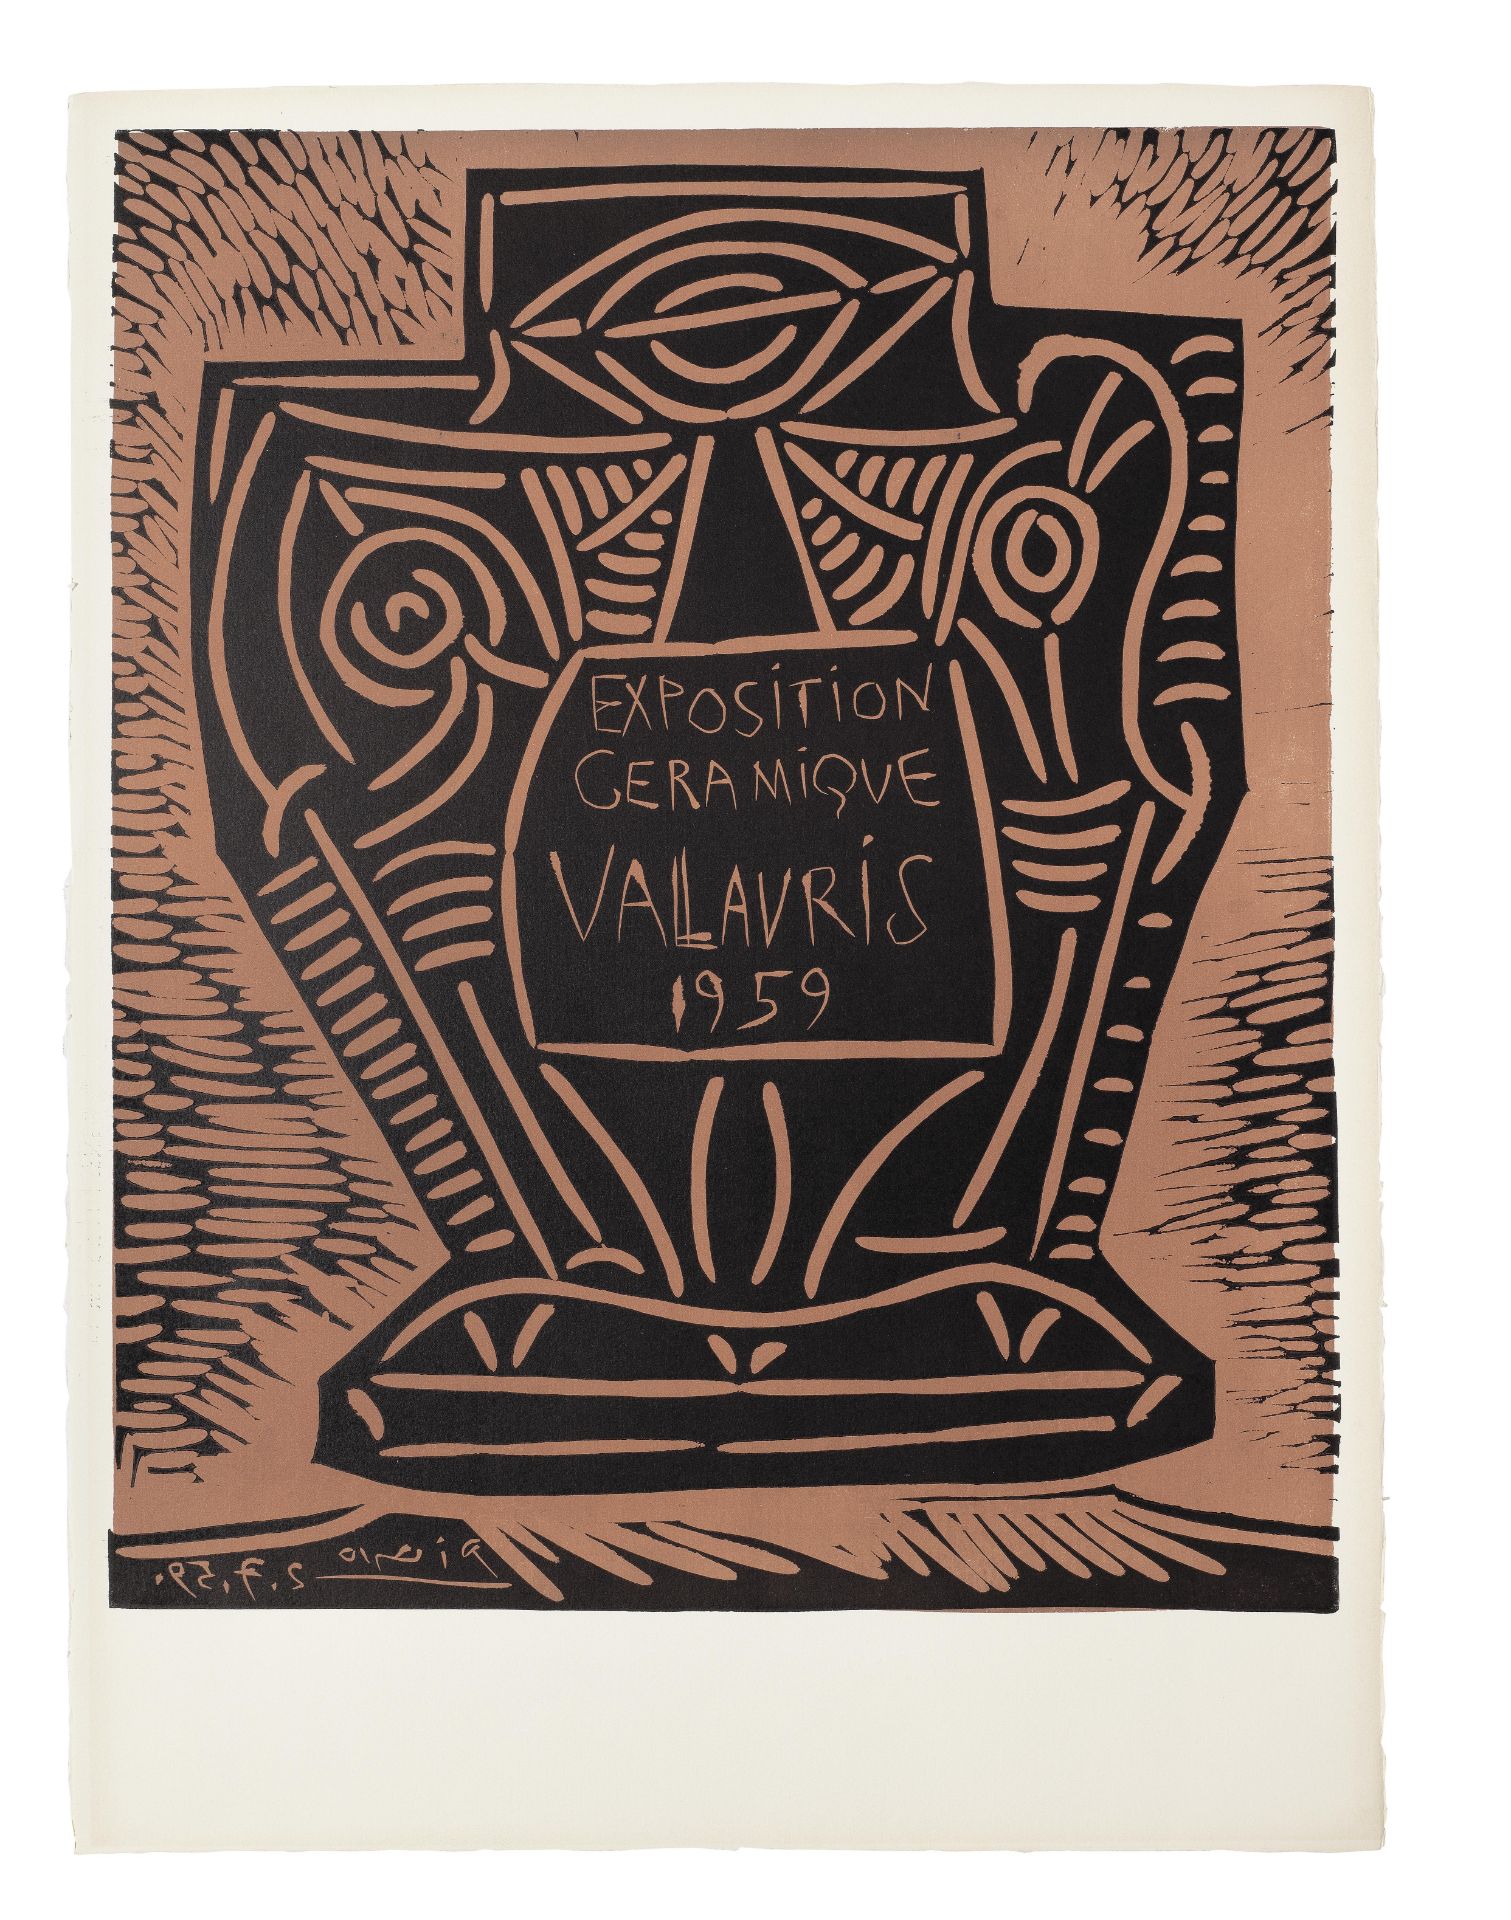 Pablo Picasso (1881-1973) Exposition c&#233;ramique Vallauris, 1959 (This work is a proof aside ...